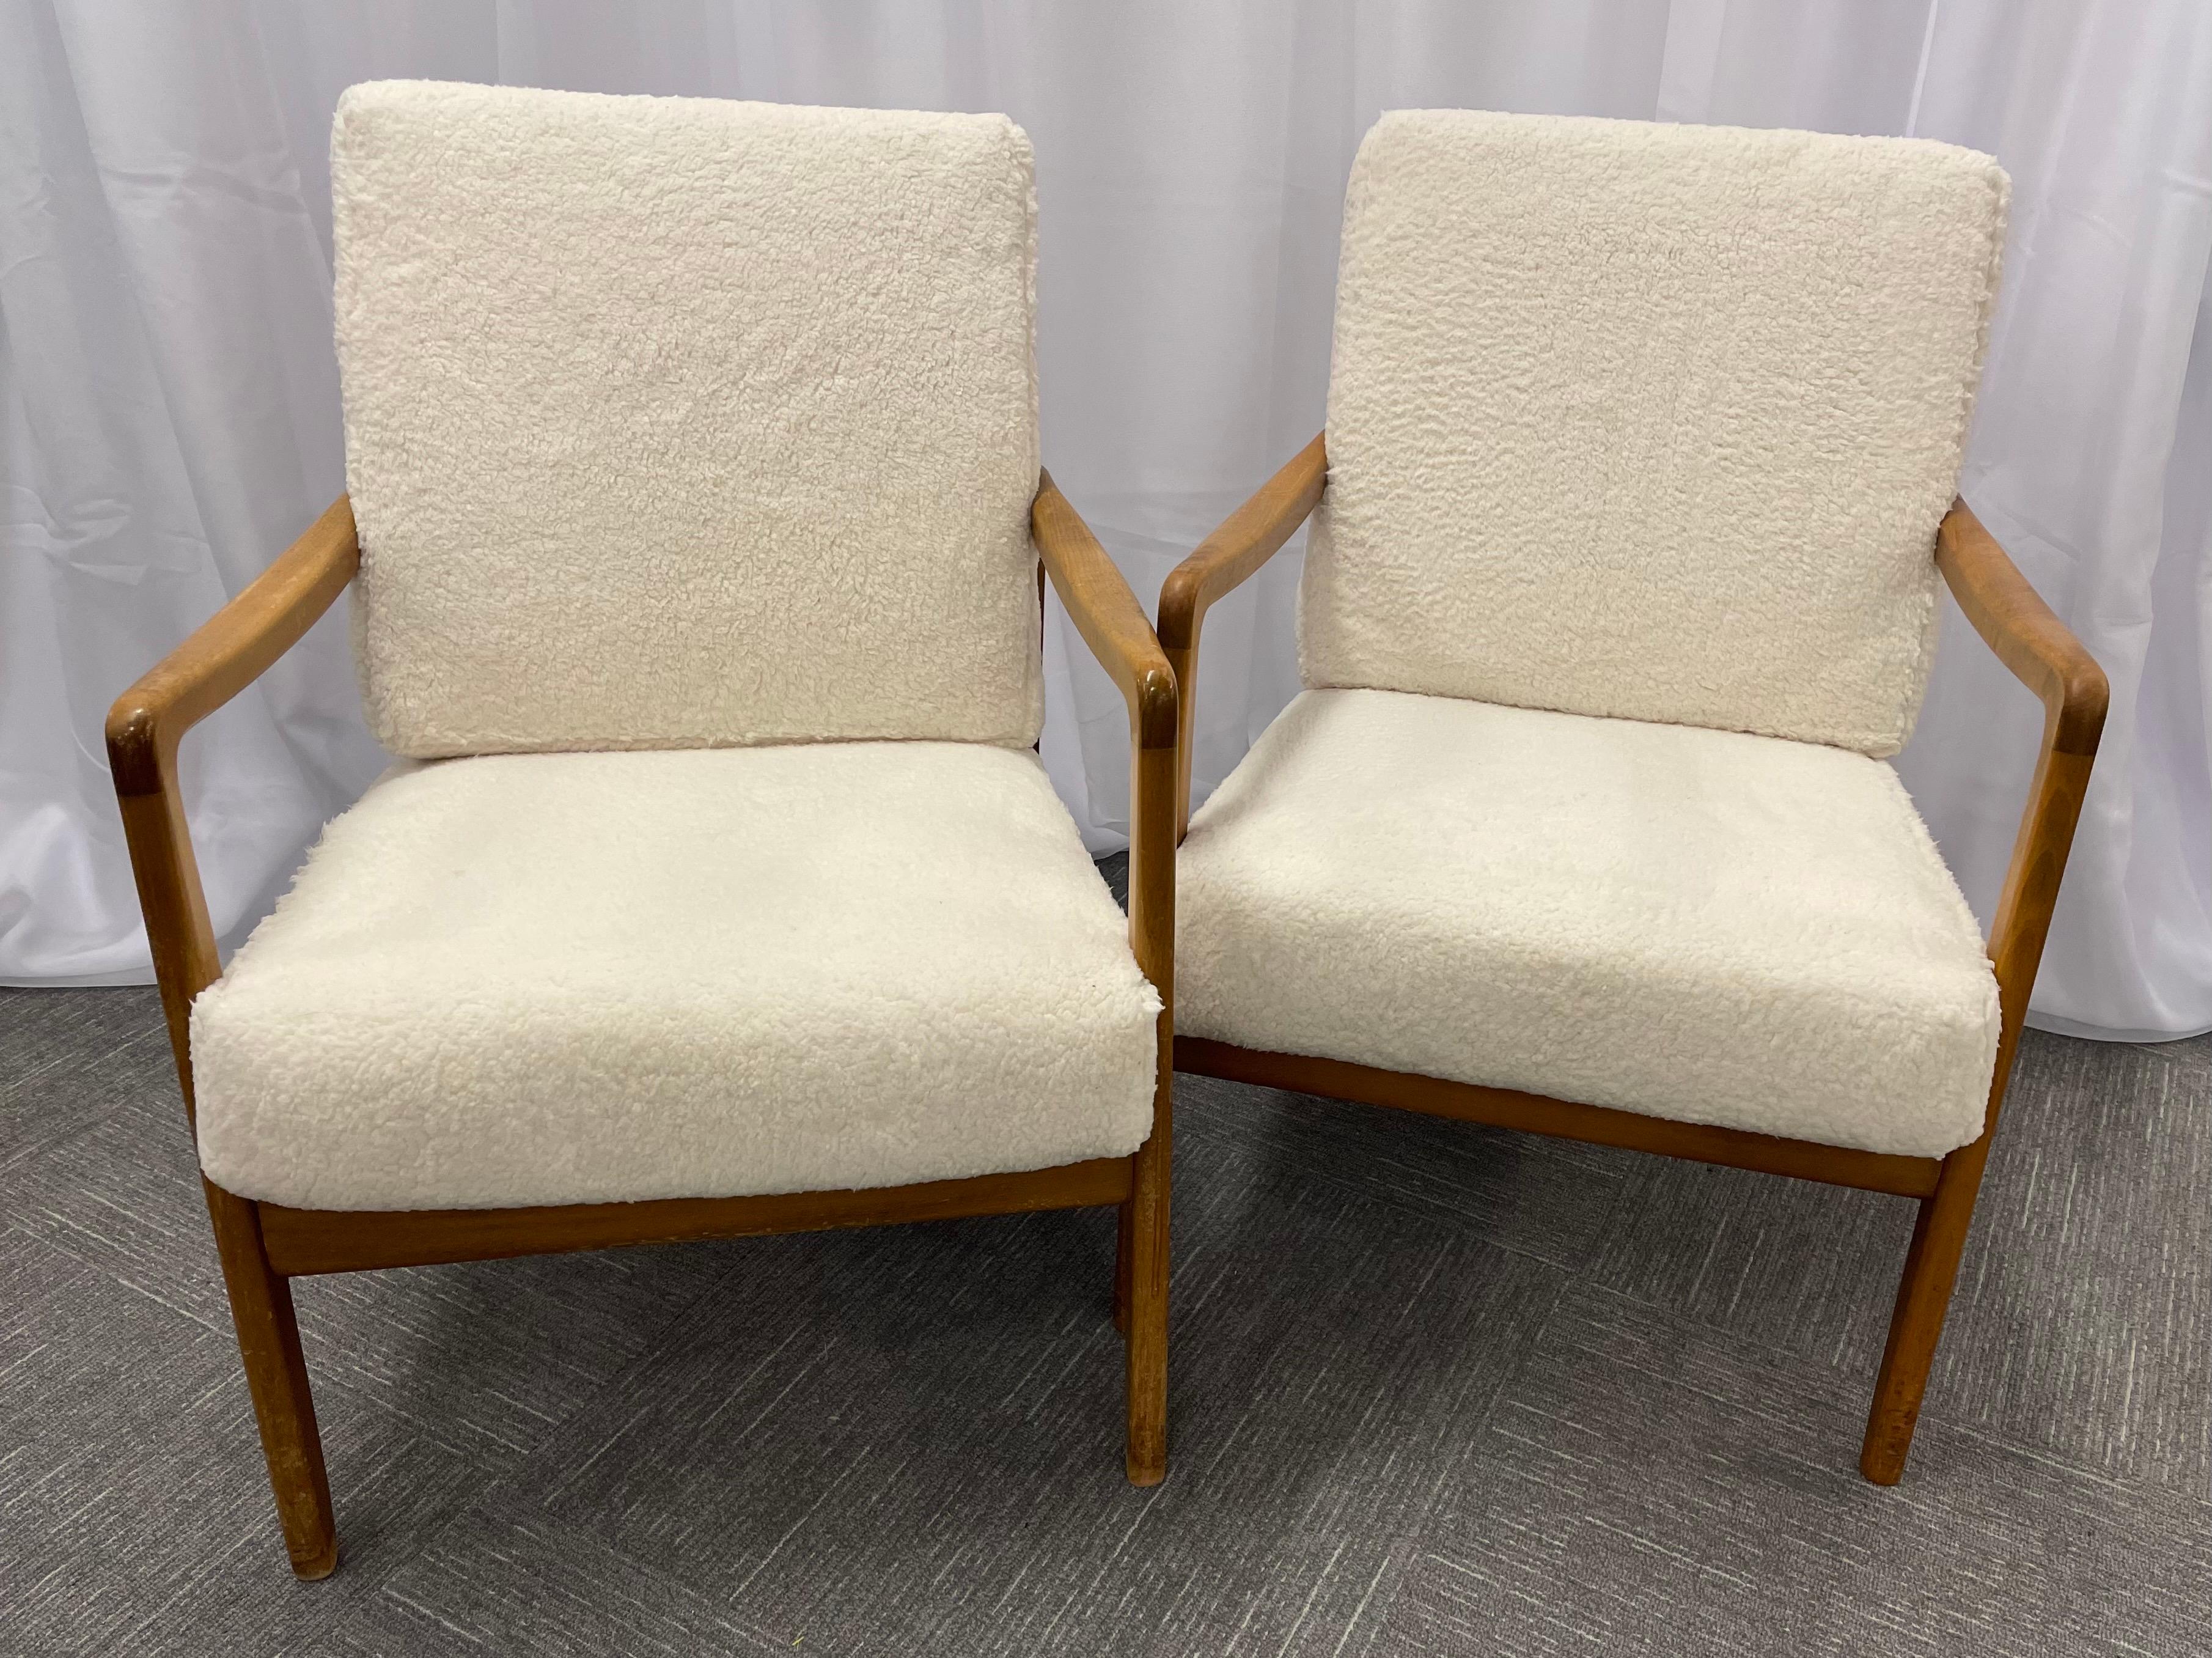 Pair of France & Daverkosen Teak Armchairs from Mid-Century Modern era. If sleek and stylish are what you are seeking look no more. This finely constructed branded pair of lounge chairs (Backrest bears label 